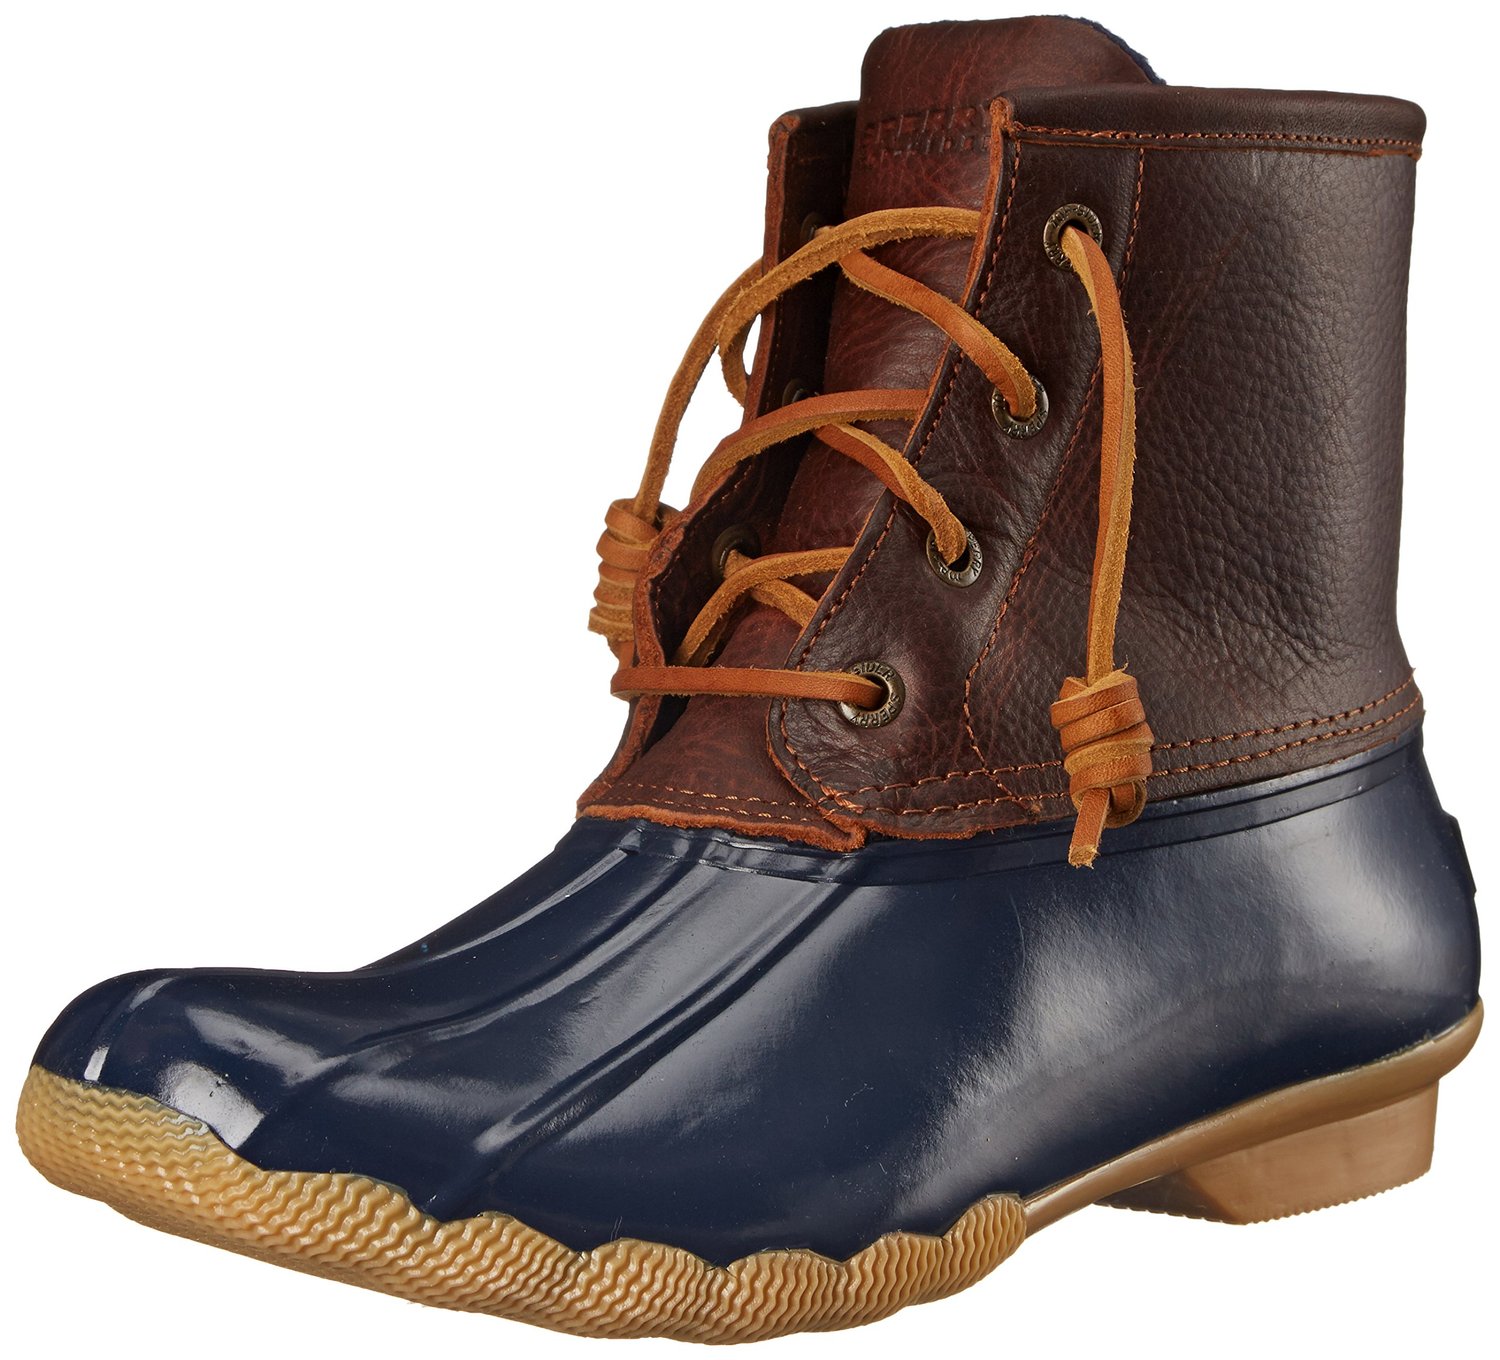 are sperry duck boots true to size